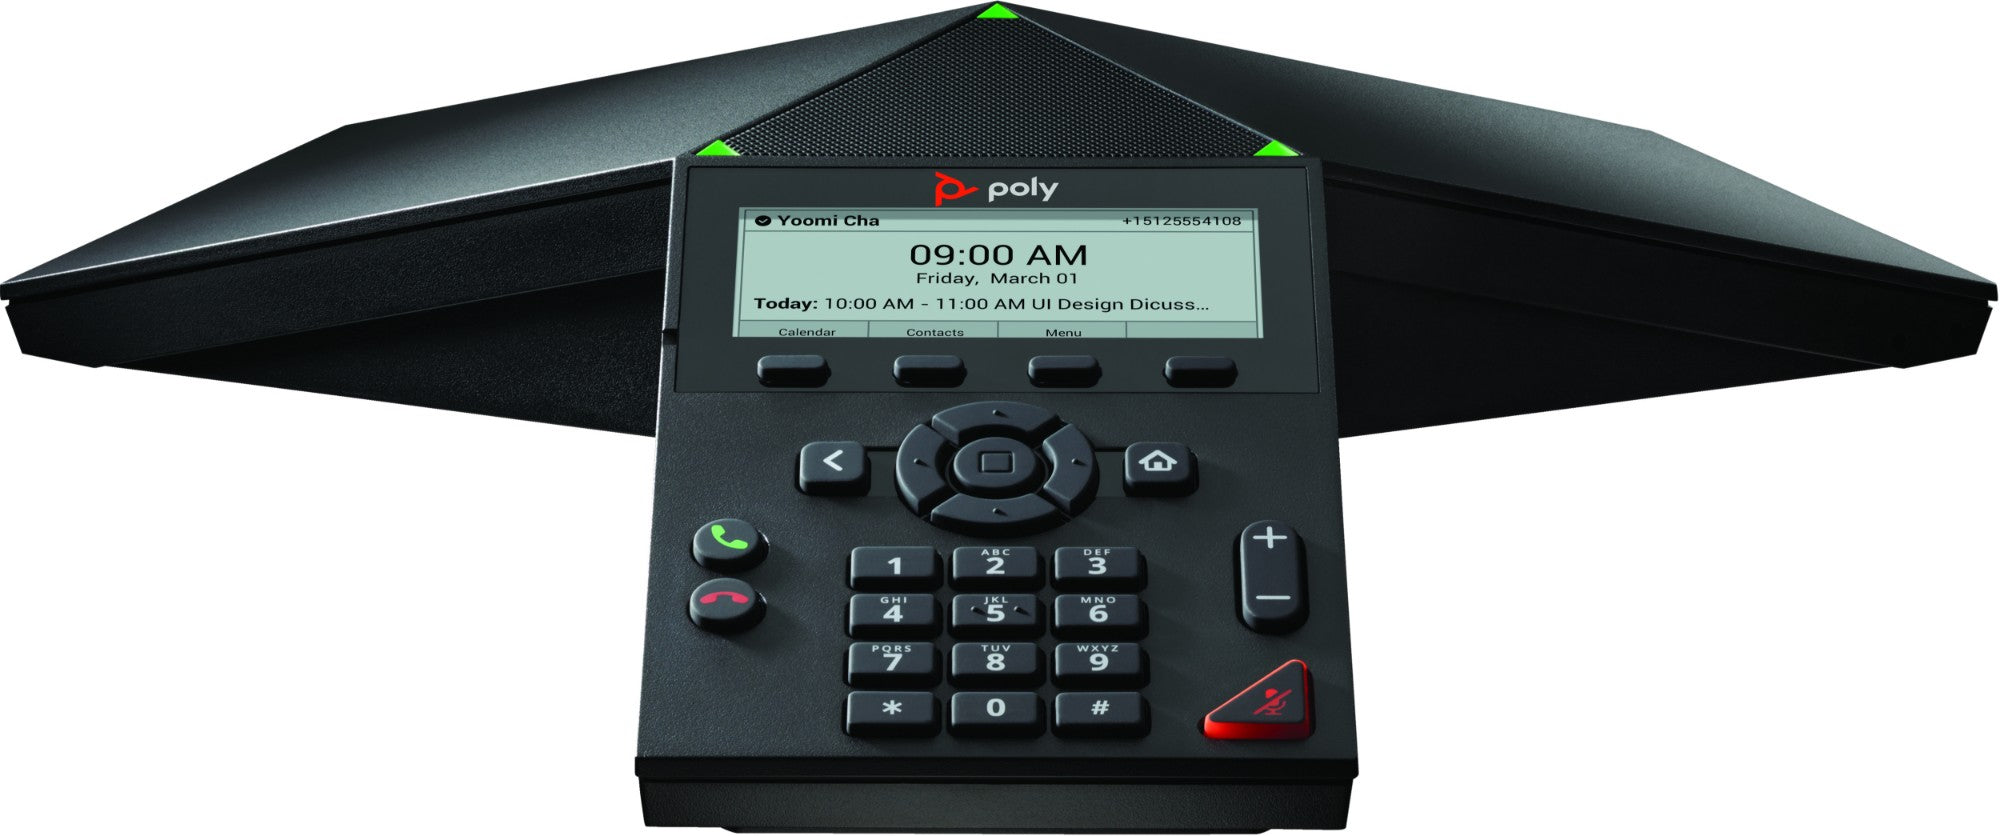 Trio 8300 IP Conference Phone and PoE-enabled